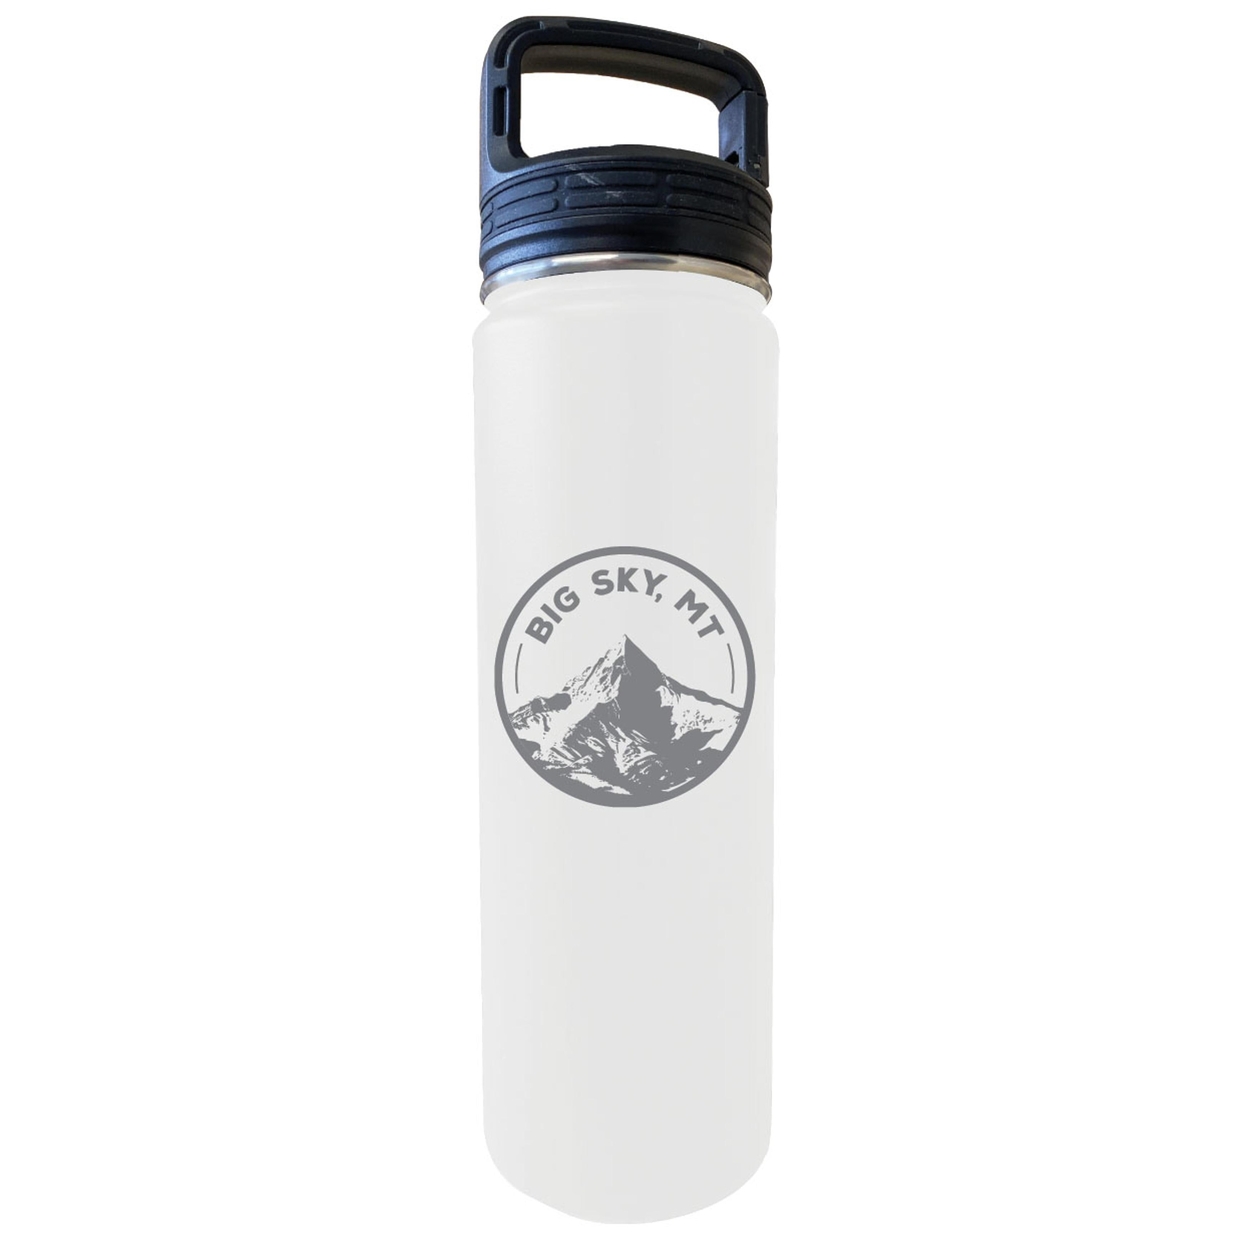 Big Sky Montana Souvenir 32 Oz Engraved Insulated Stainless Steel Tumbler - White,,4-Pack